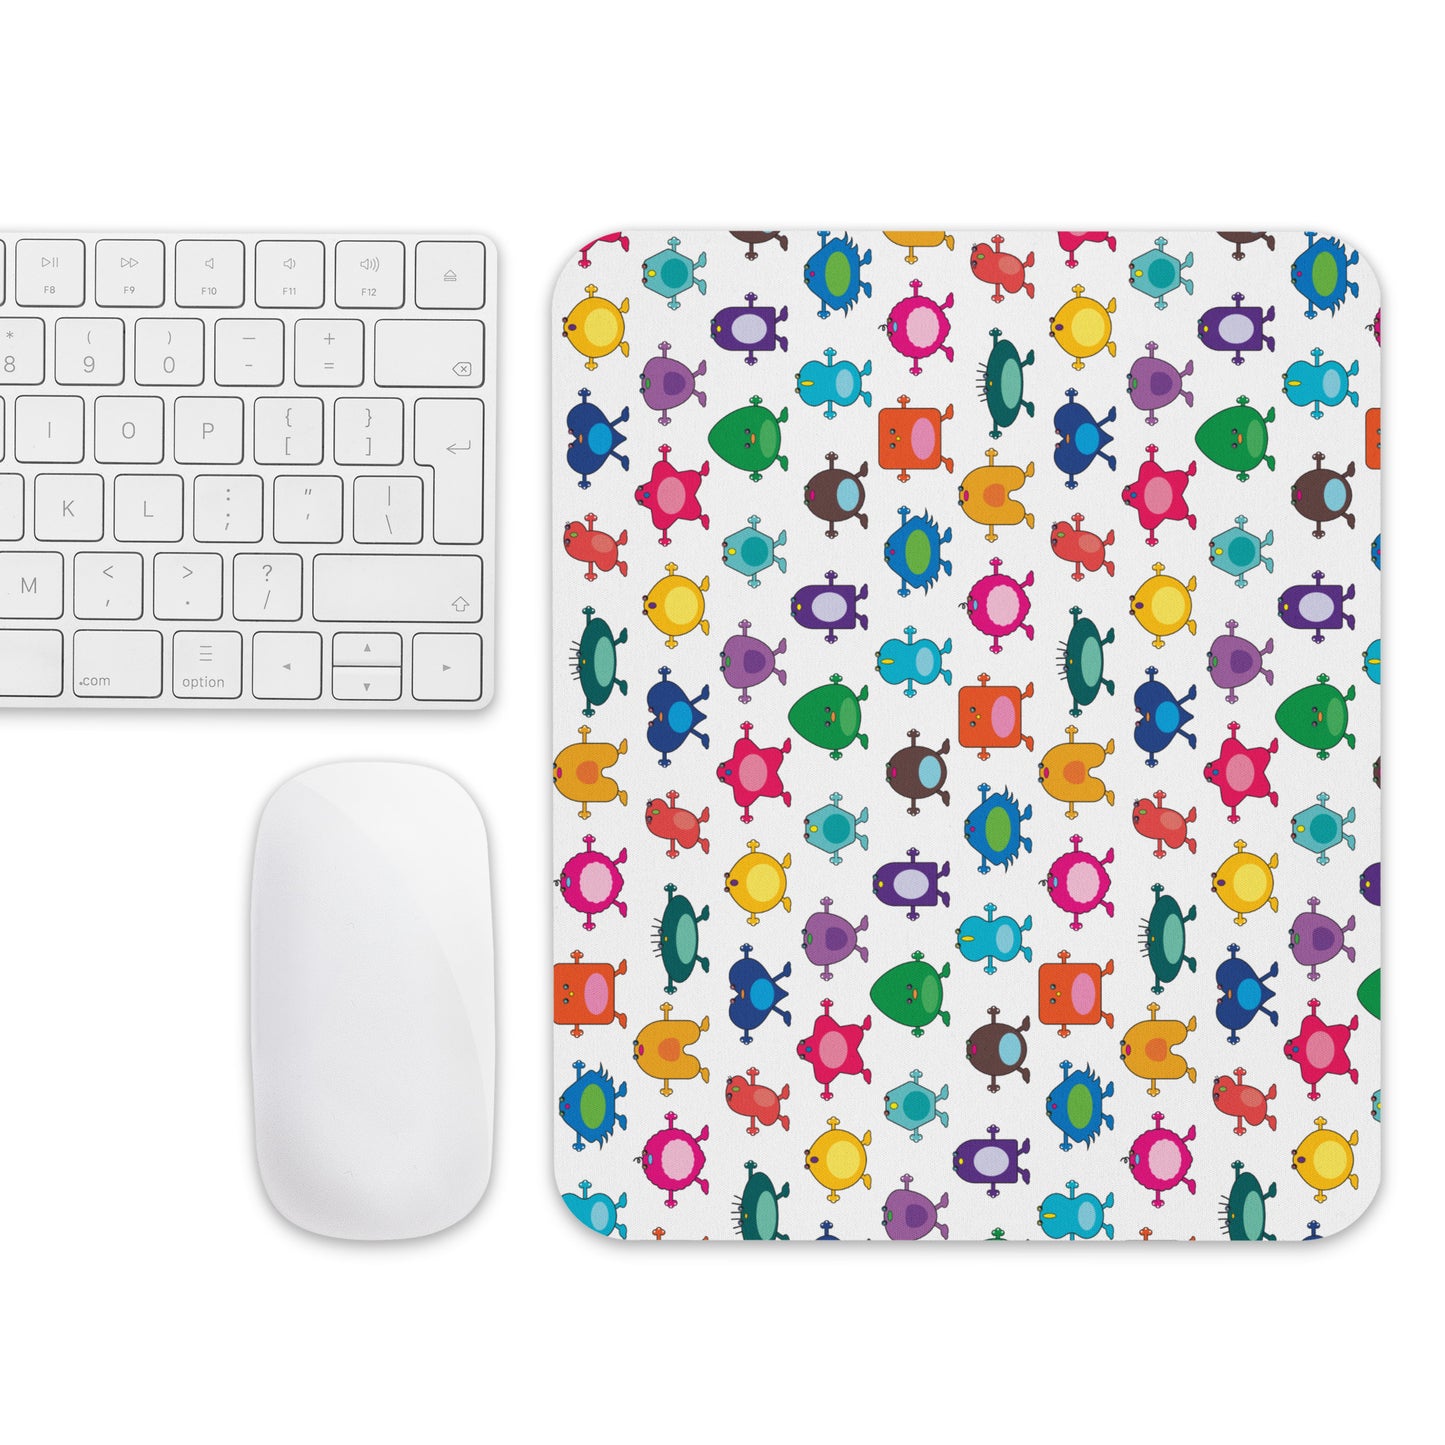 Mouse pad with monsters